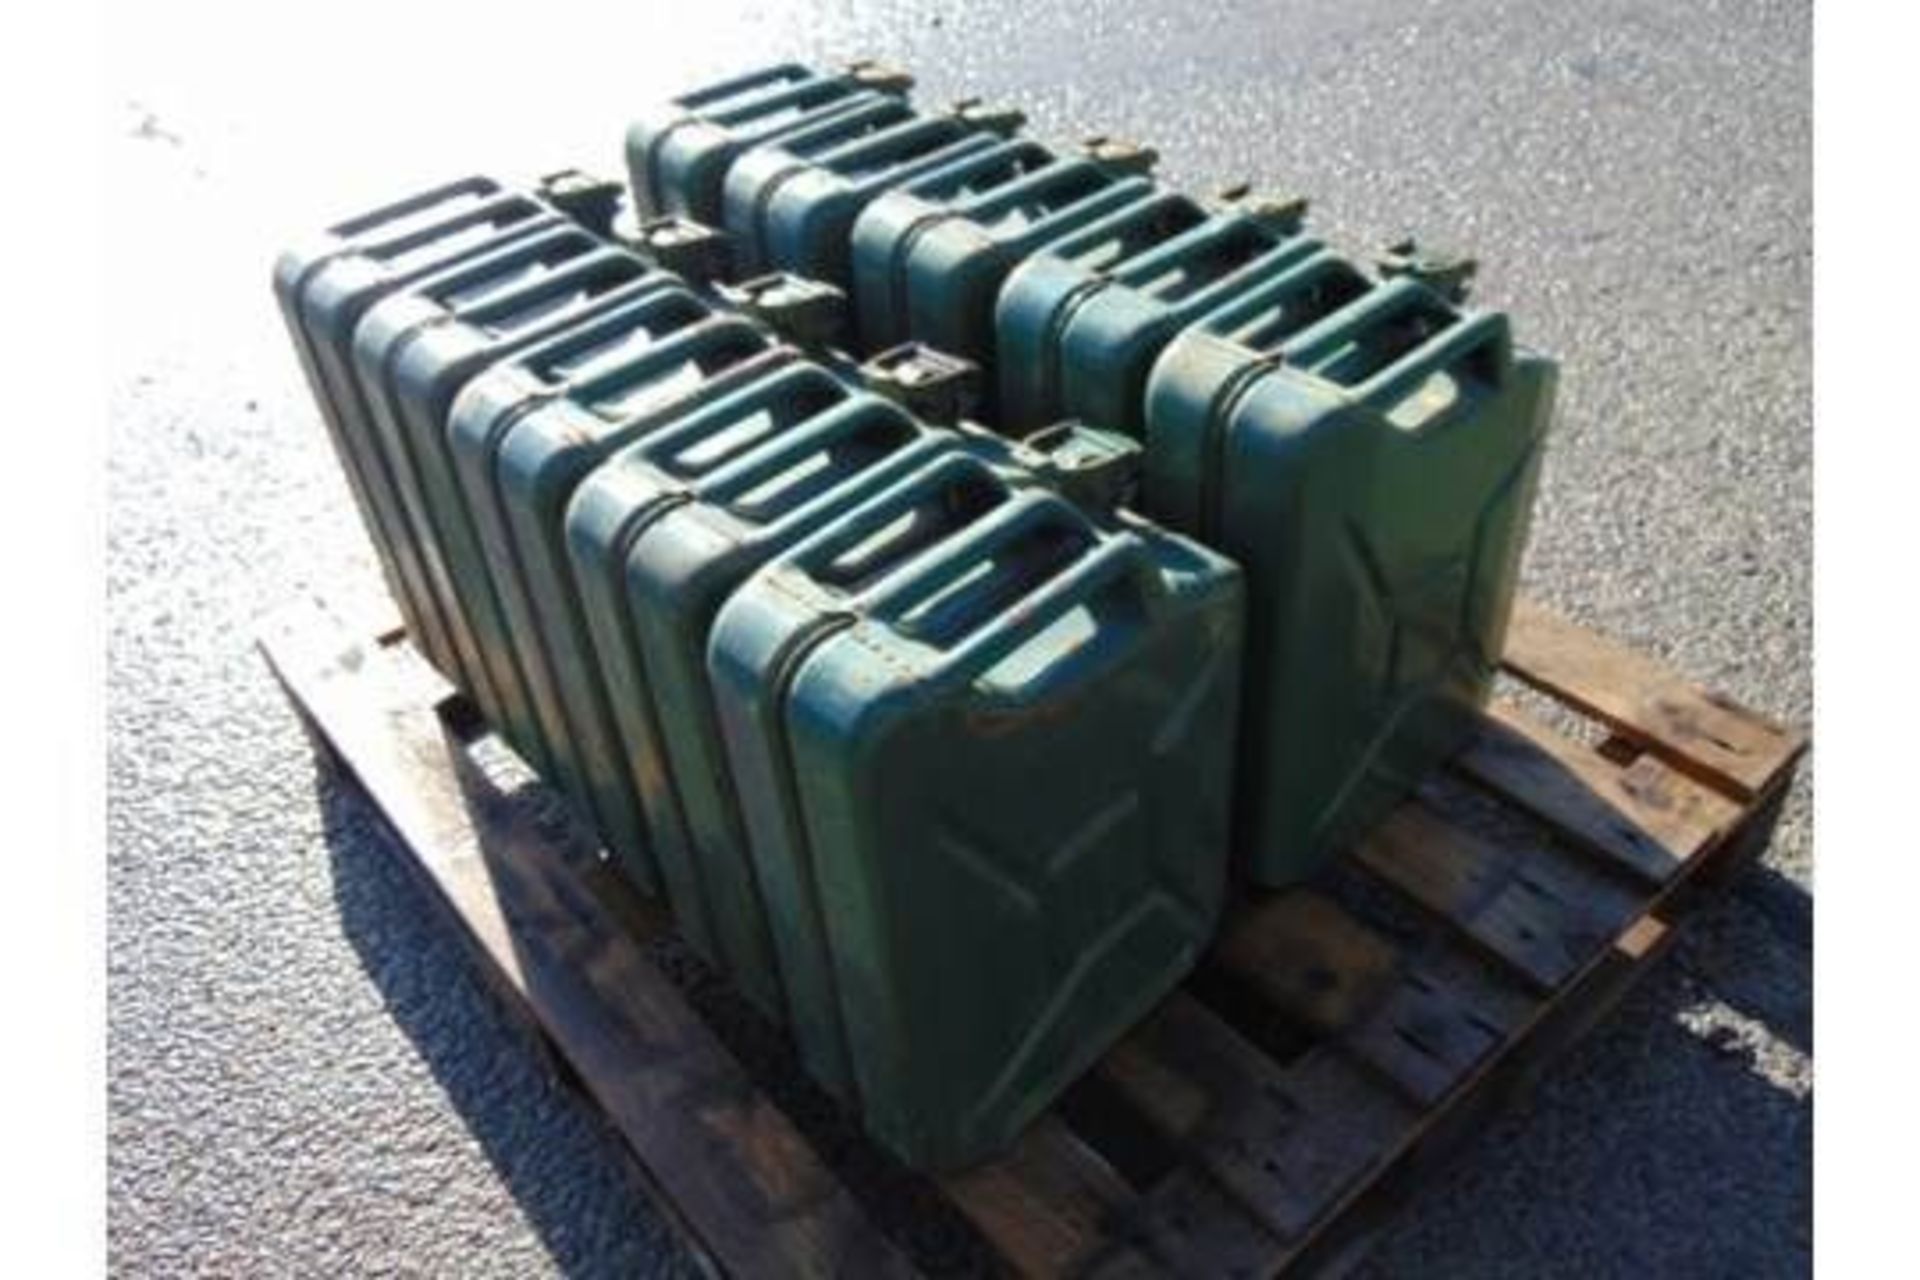 You are bidding on 20 x (2x10) Unissued NATO Issue 20L Jerry Cans - Image 5 of 7